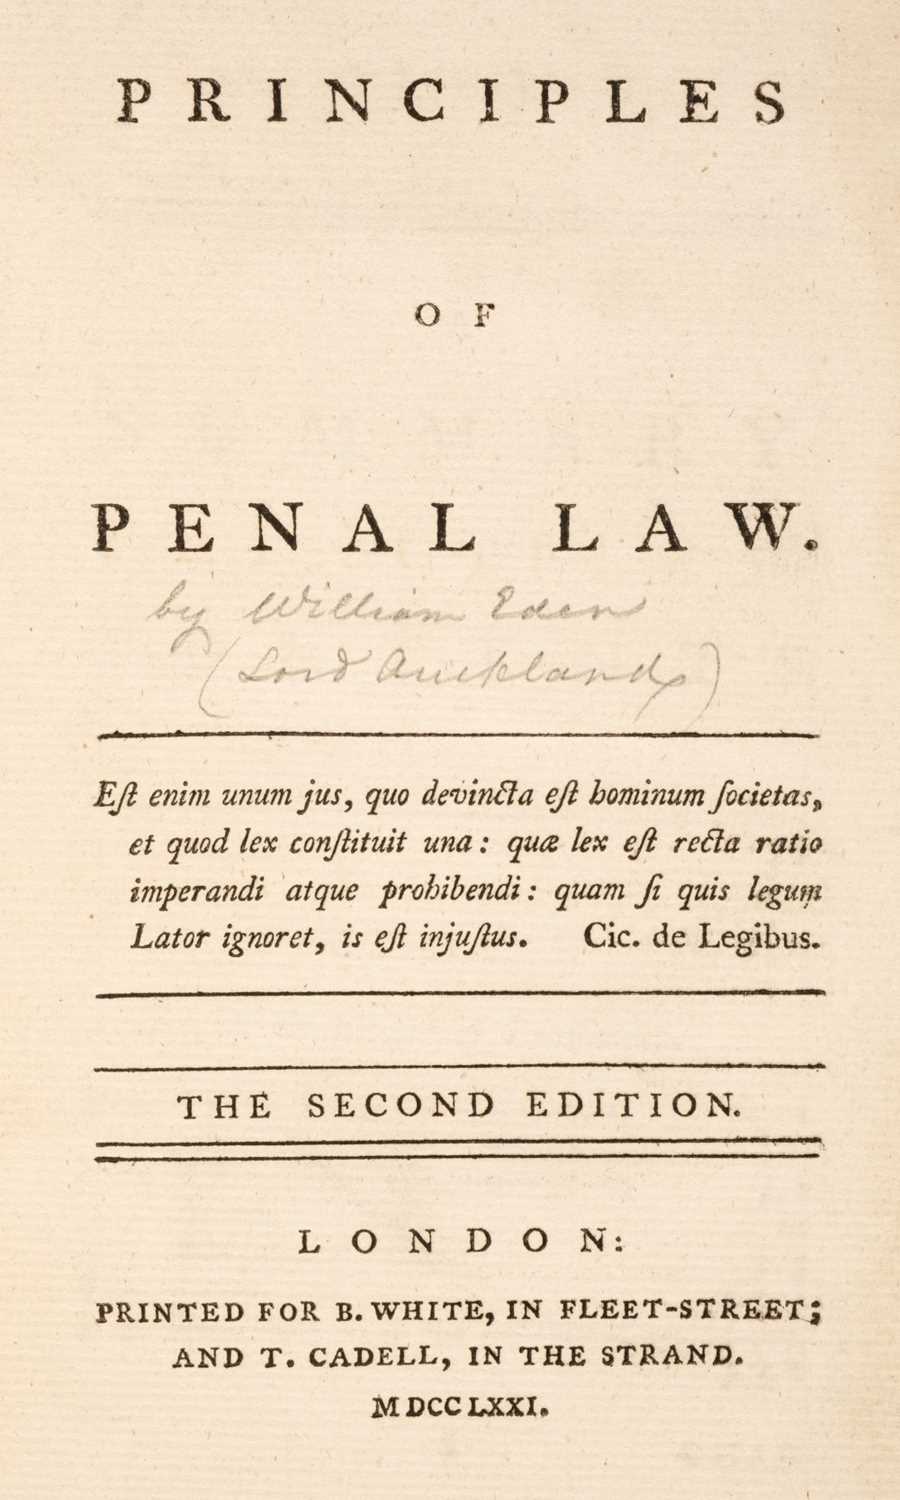 Lot 233 - Eden (William). Principles of Penal Law, 2nd edition, London: B. White and T. Cadell, 1771